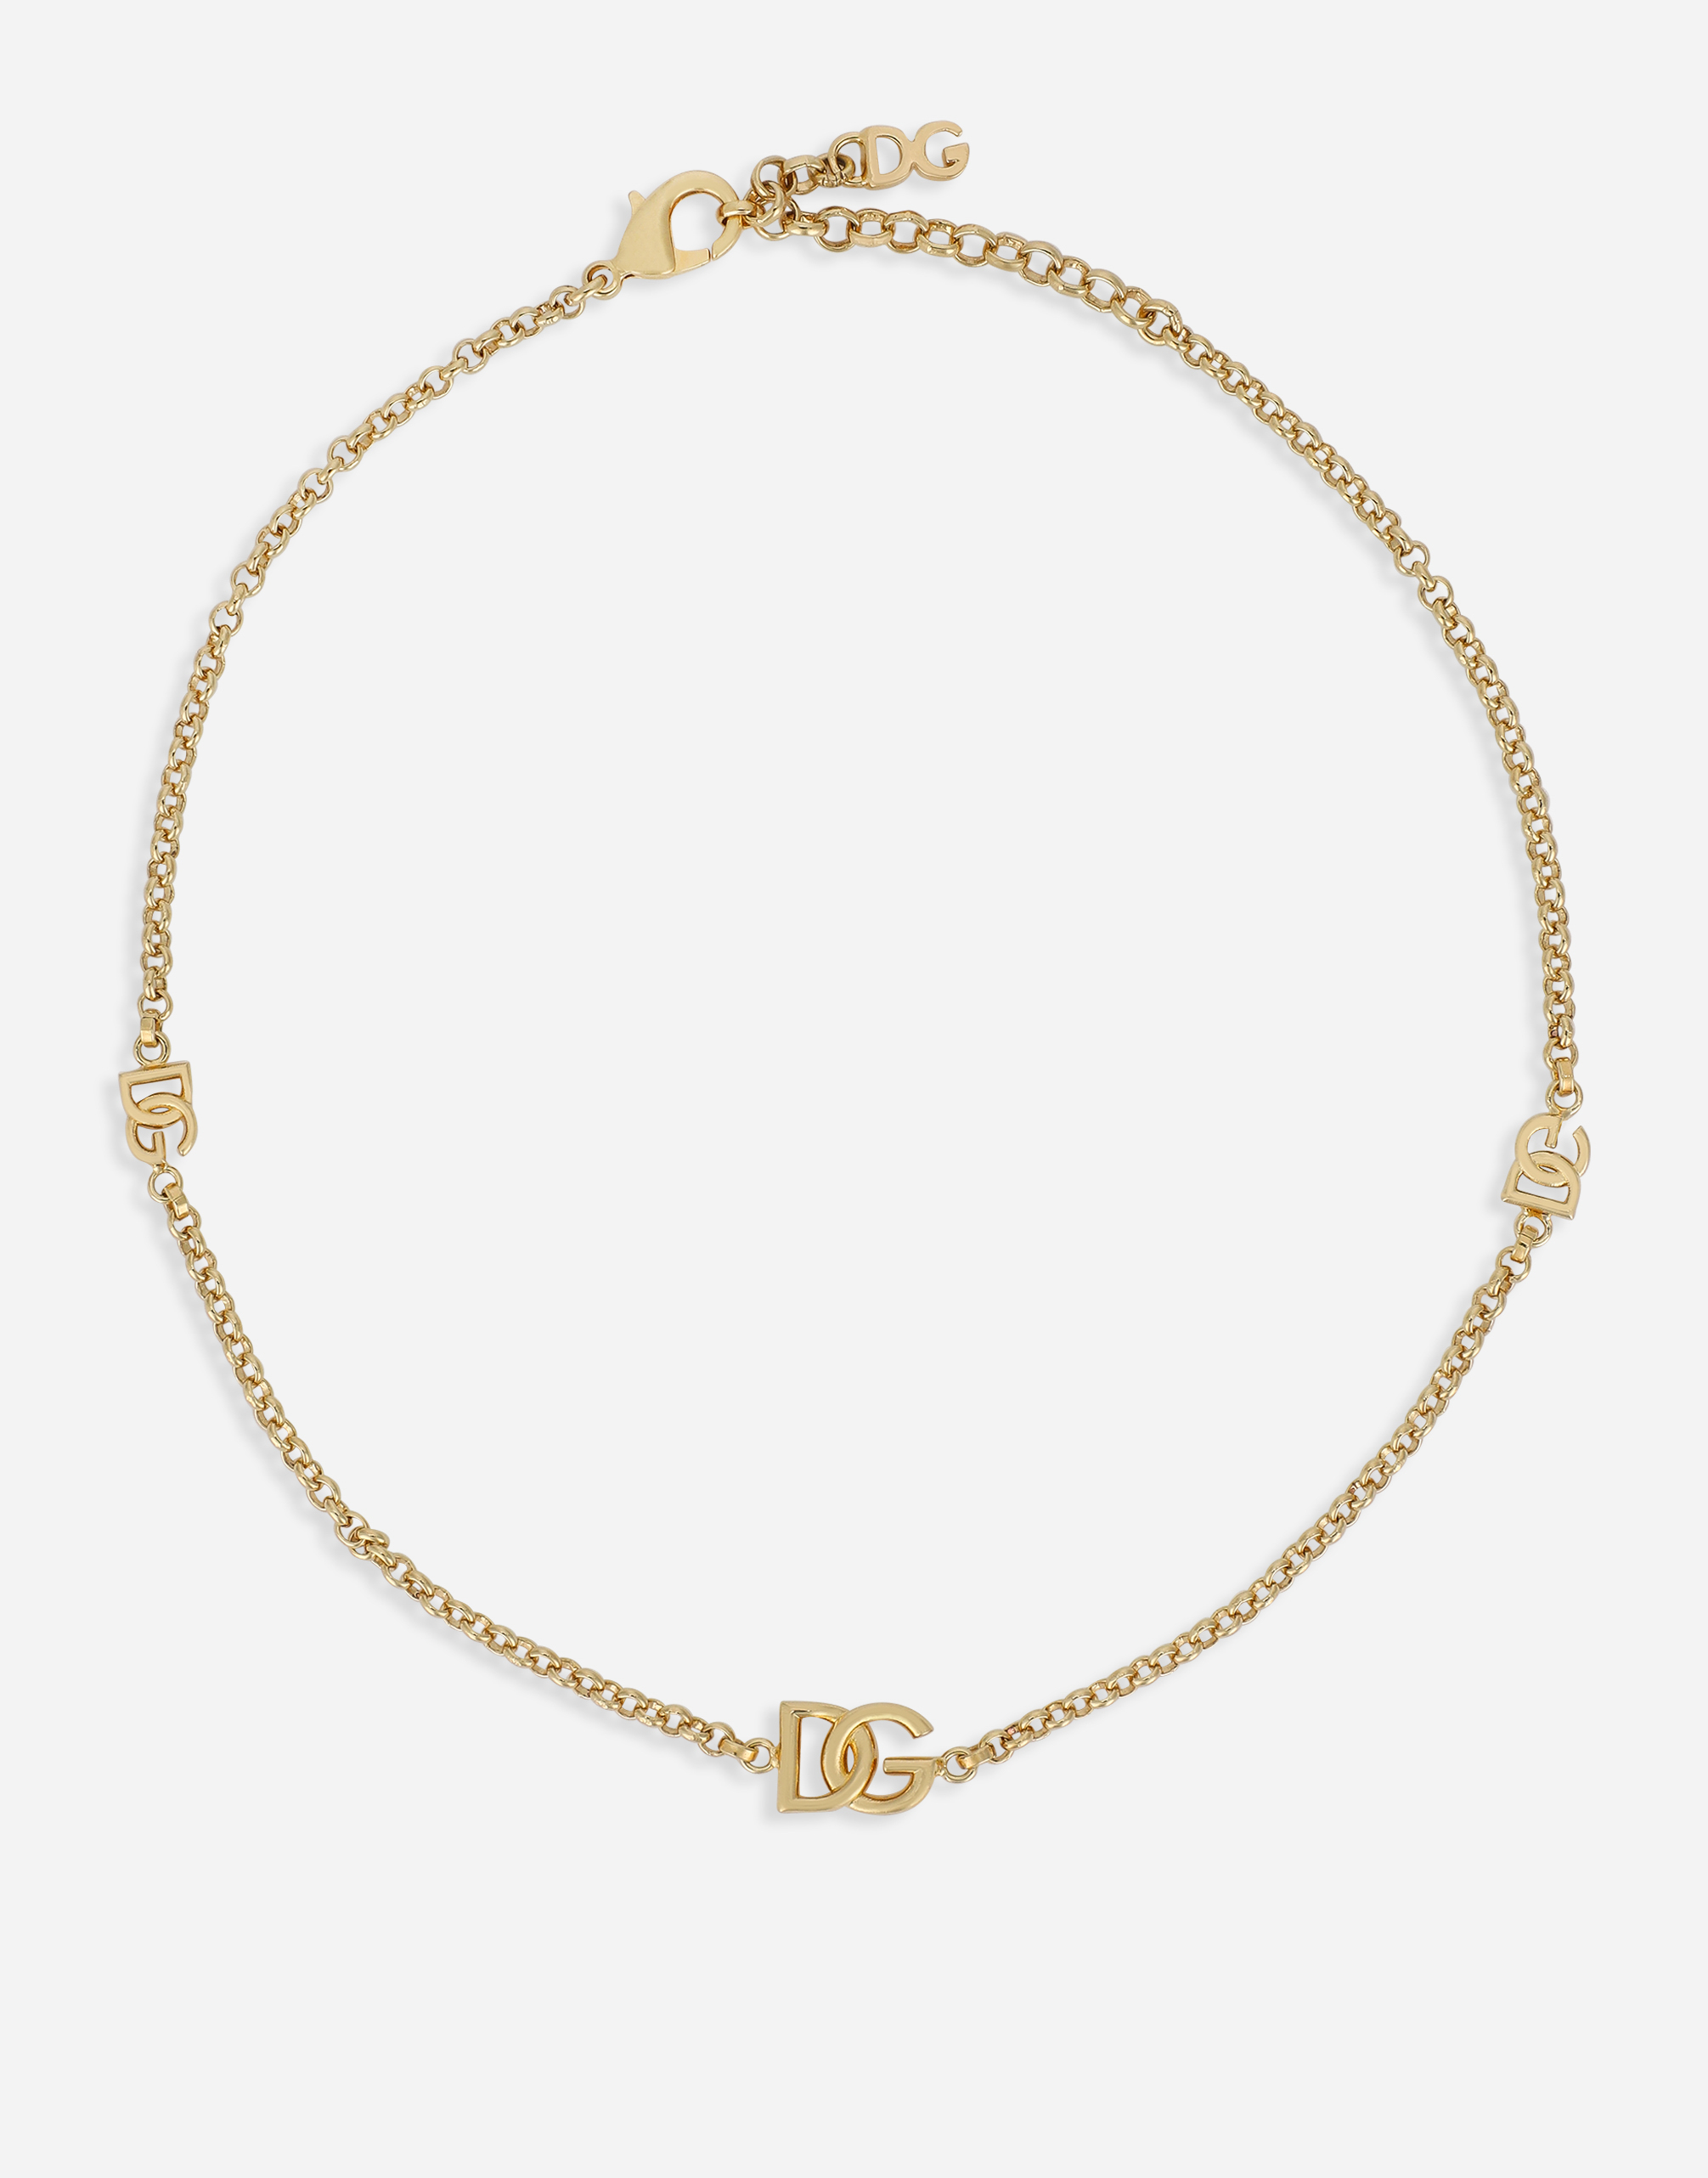 Fine chain choker with DG logos in Gold